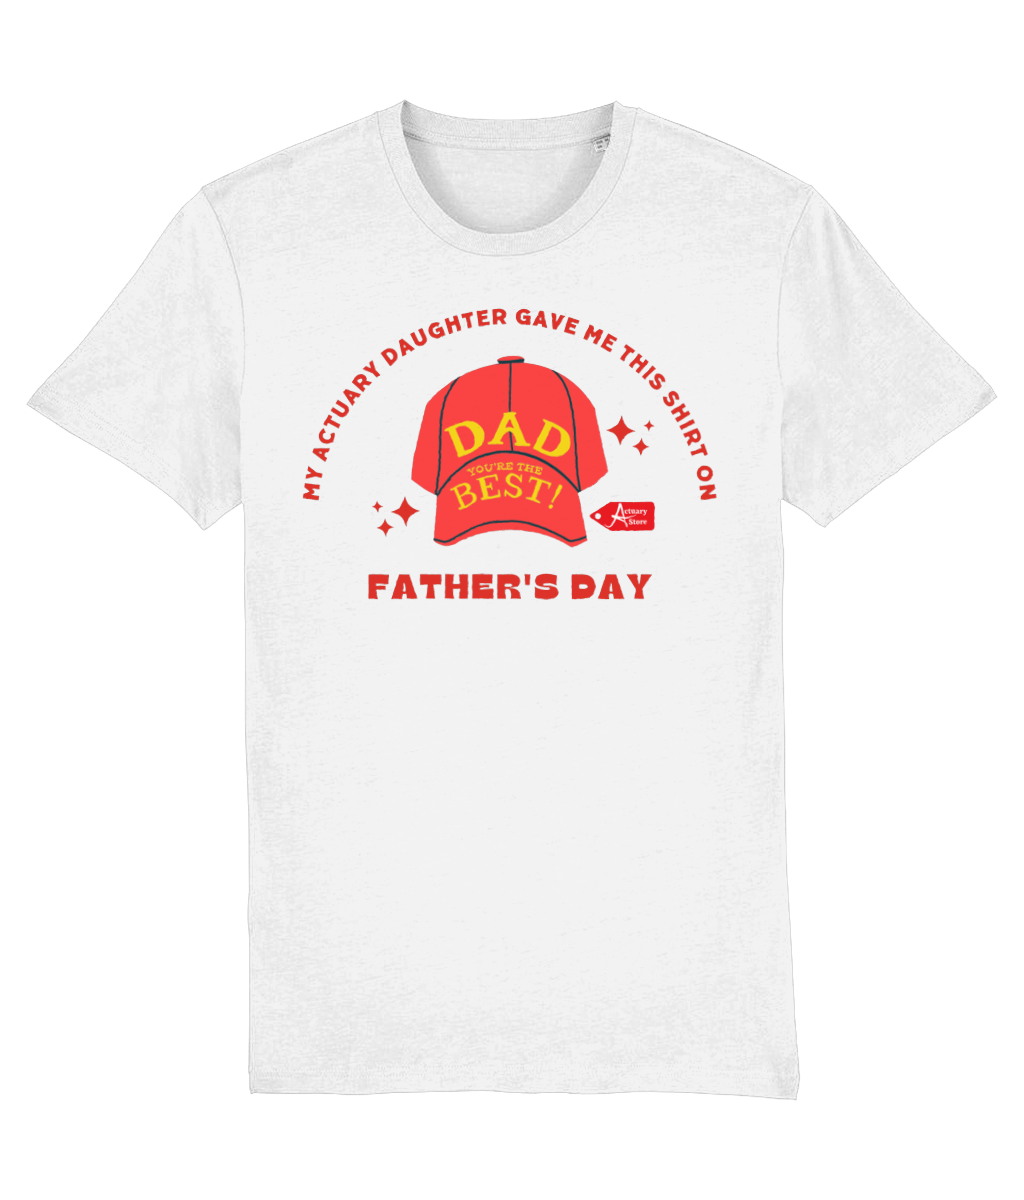 My Actuary Daughter Gave Me This Shirt On Father's Day Any Colour T-Shirt